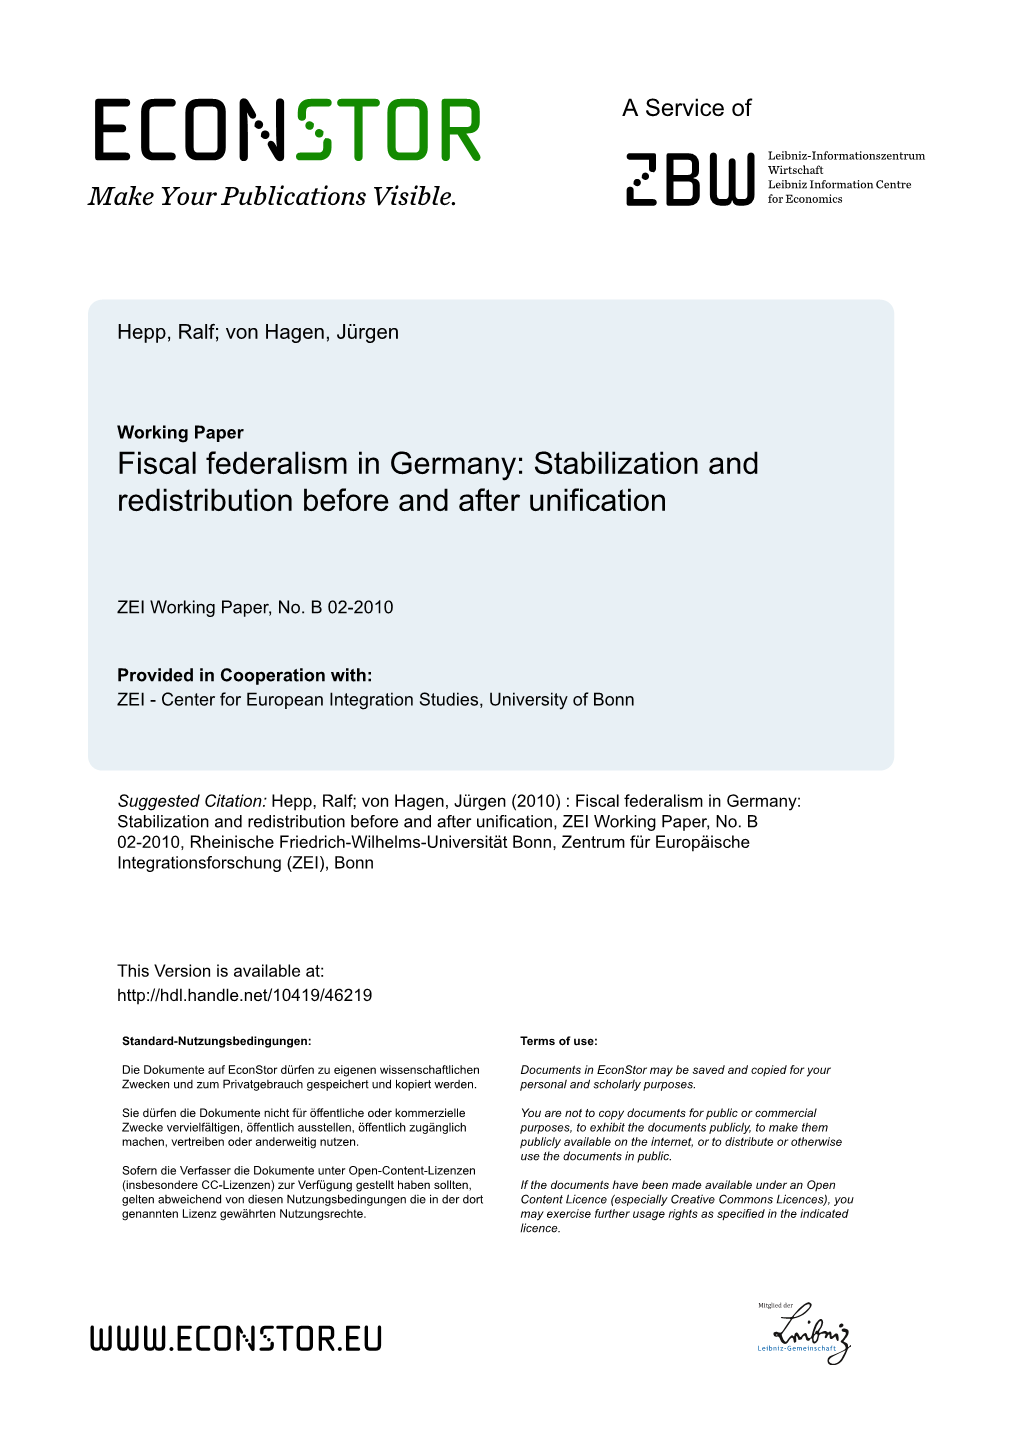 Fiscal Federalism in Germany: Stabilization and Redistribution Before and After Unification